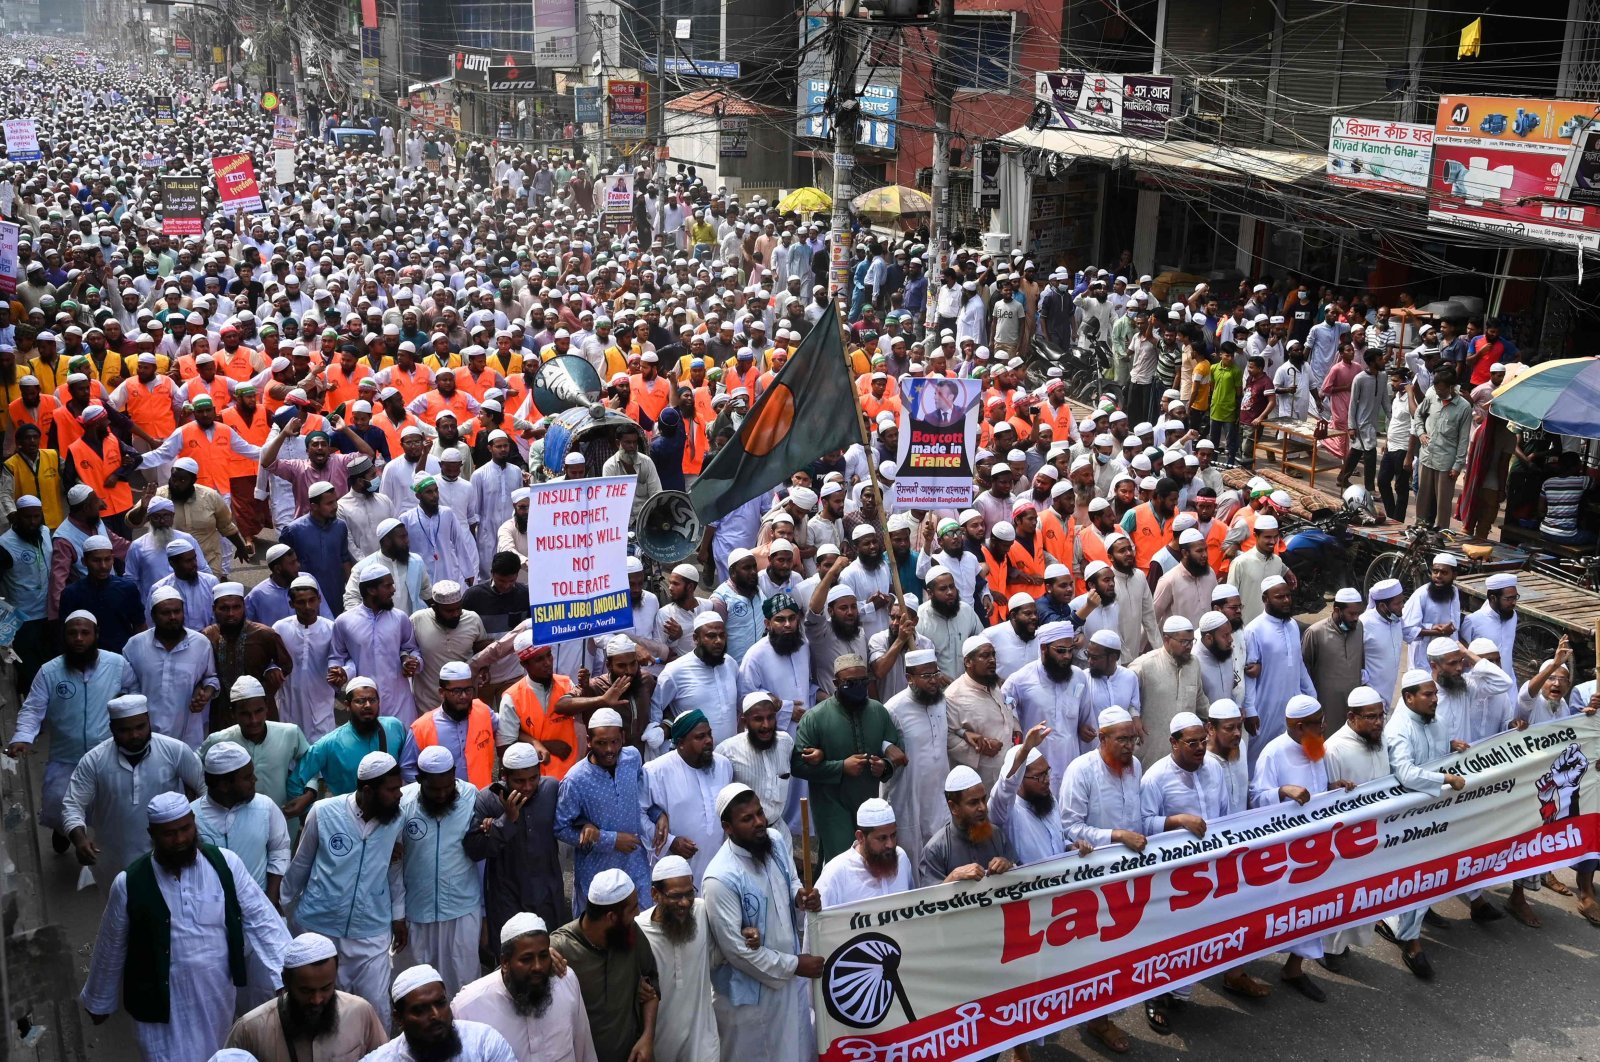 Thousands of Bangladeshi citizens hold a protest march calling for the boycott of French products and denouncing French President Emmanuel Macron for his comments on Prophet Mohammed caricatures, in Dhaka, Bangladesh, Oct. 27, 2020. (AFP)